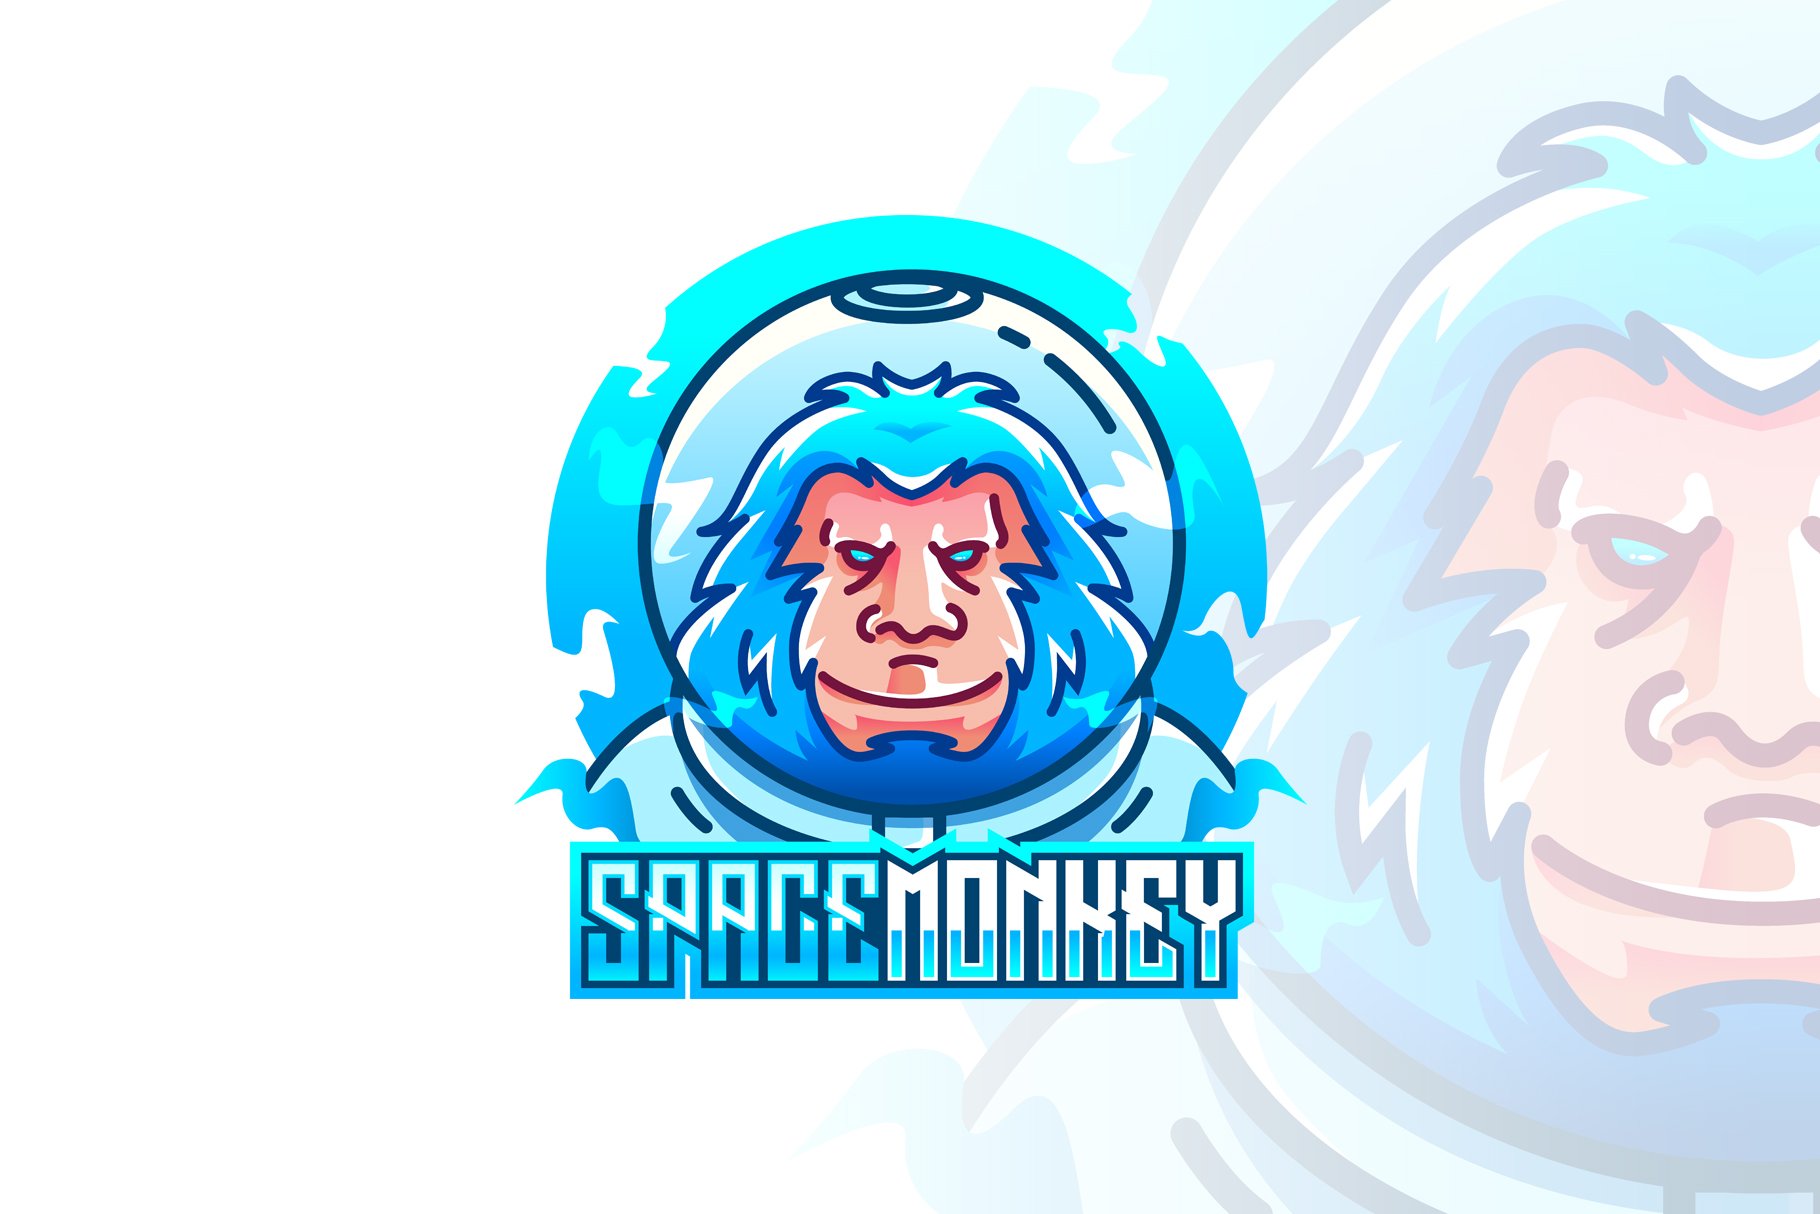 Space Monkey E-Sport Logo Template cover image.